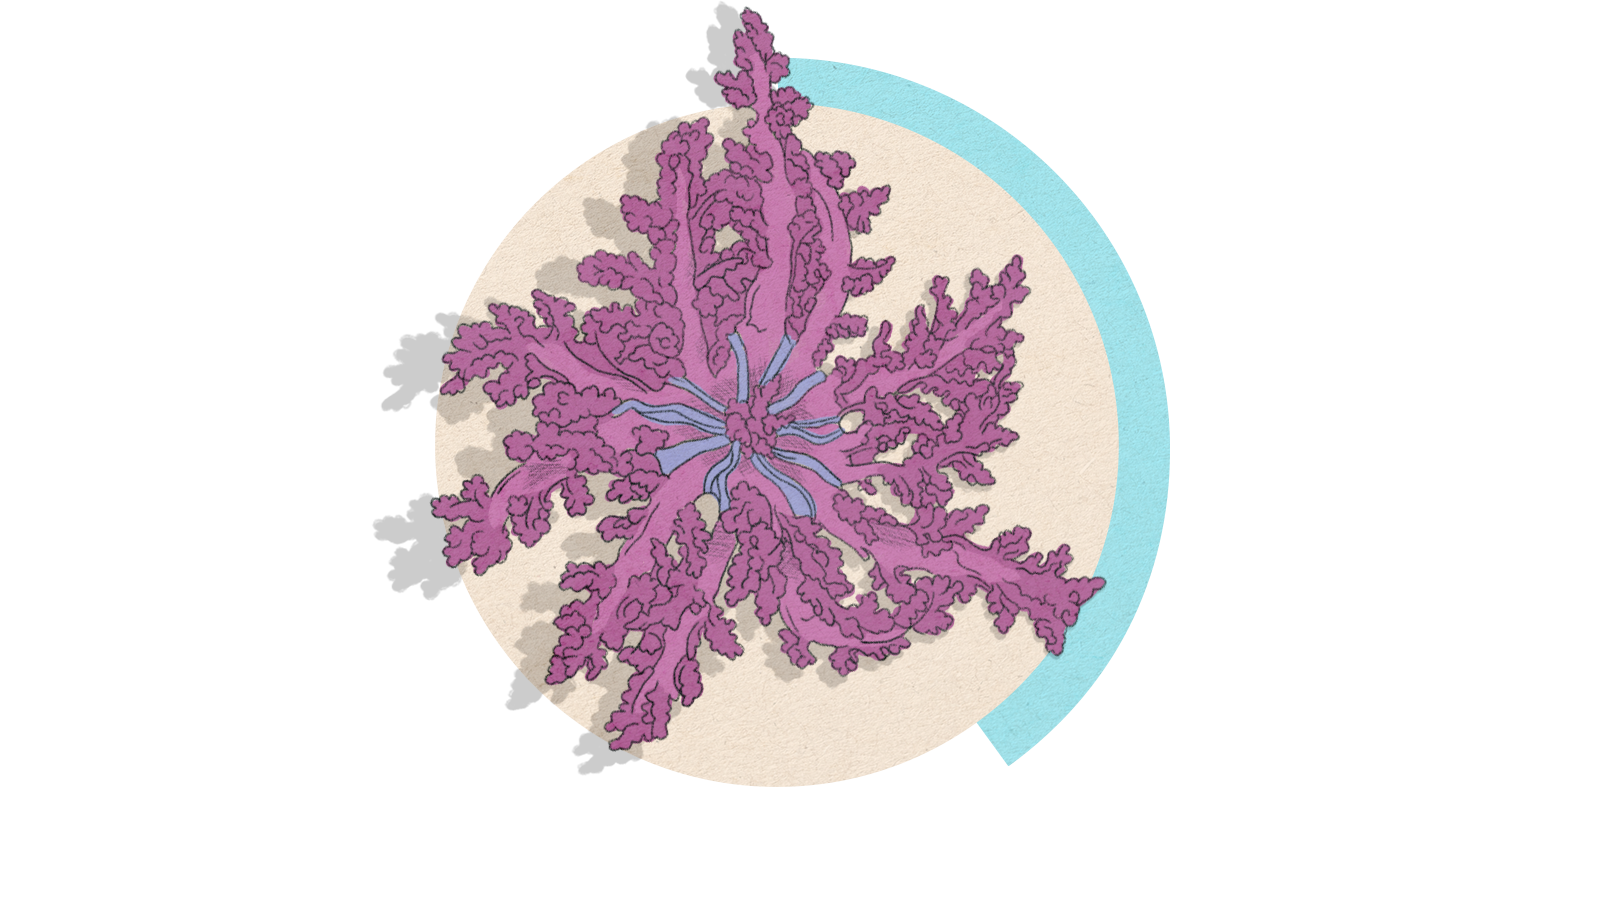 Illustration of a hellfire anenome on a circle background.